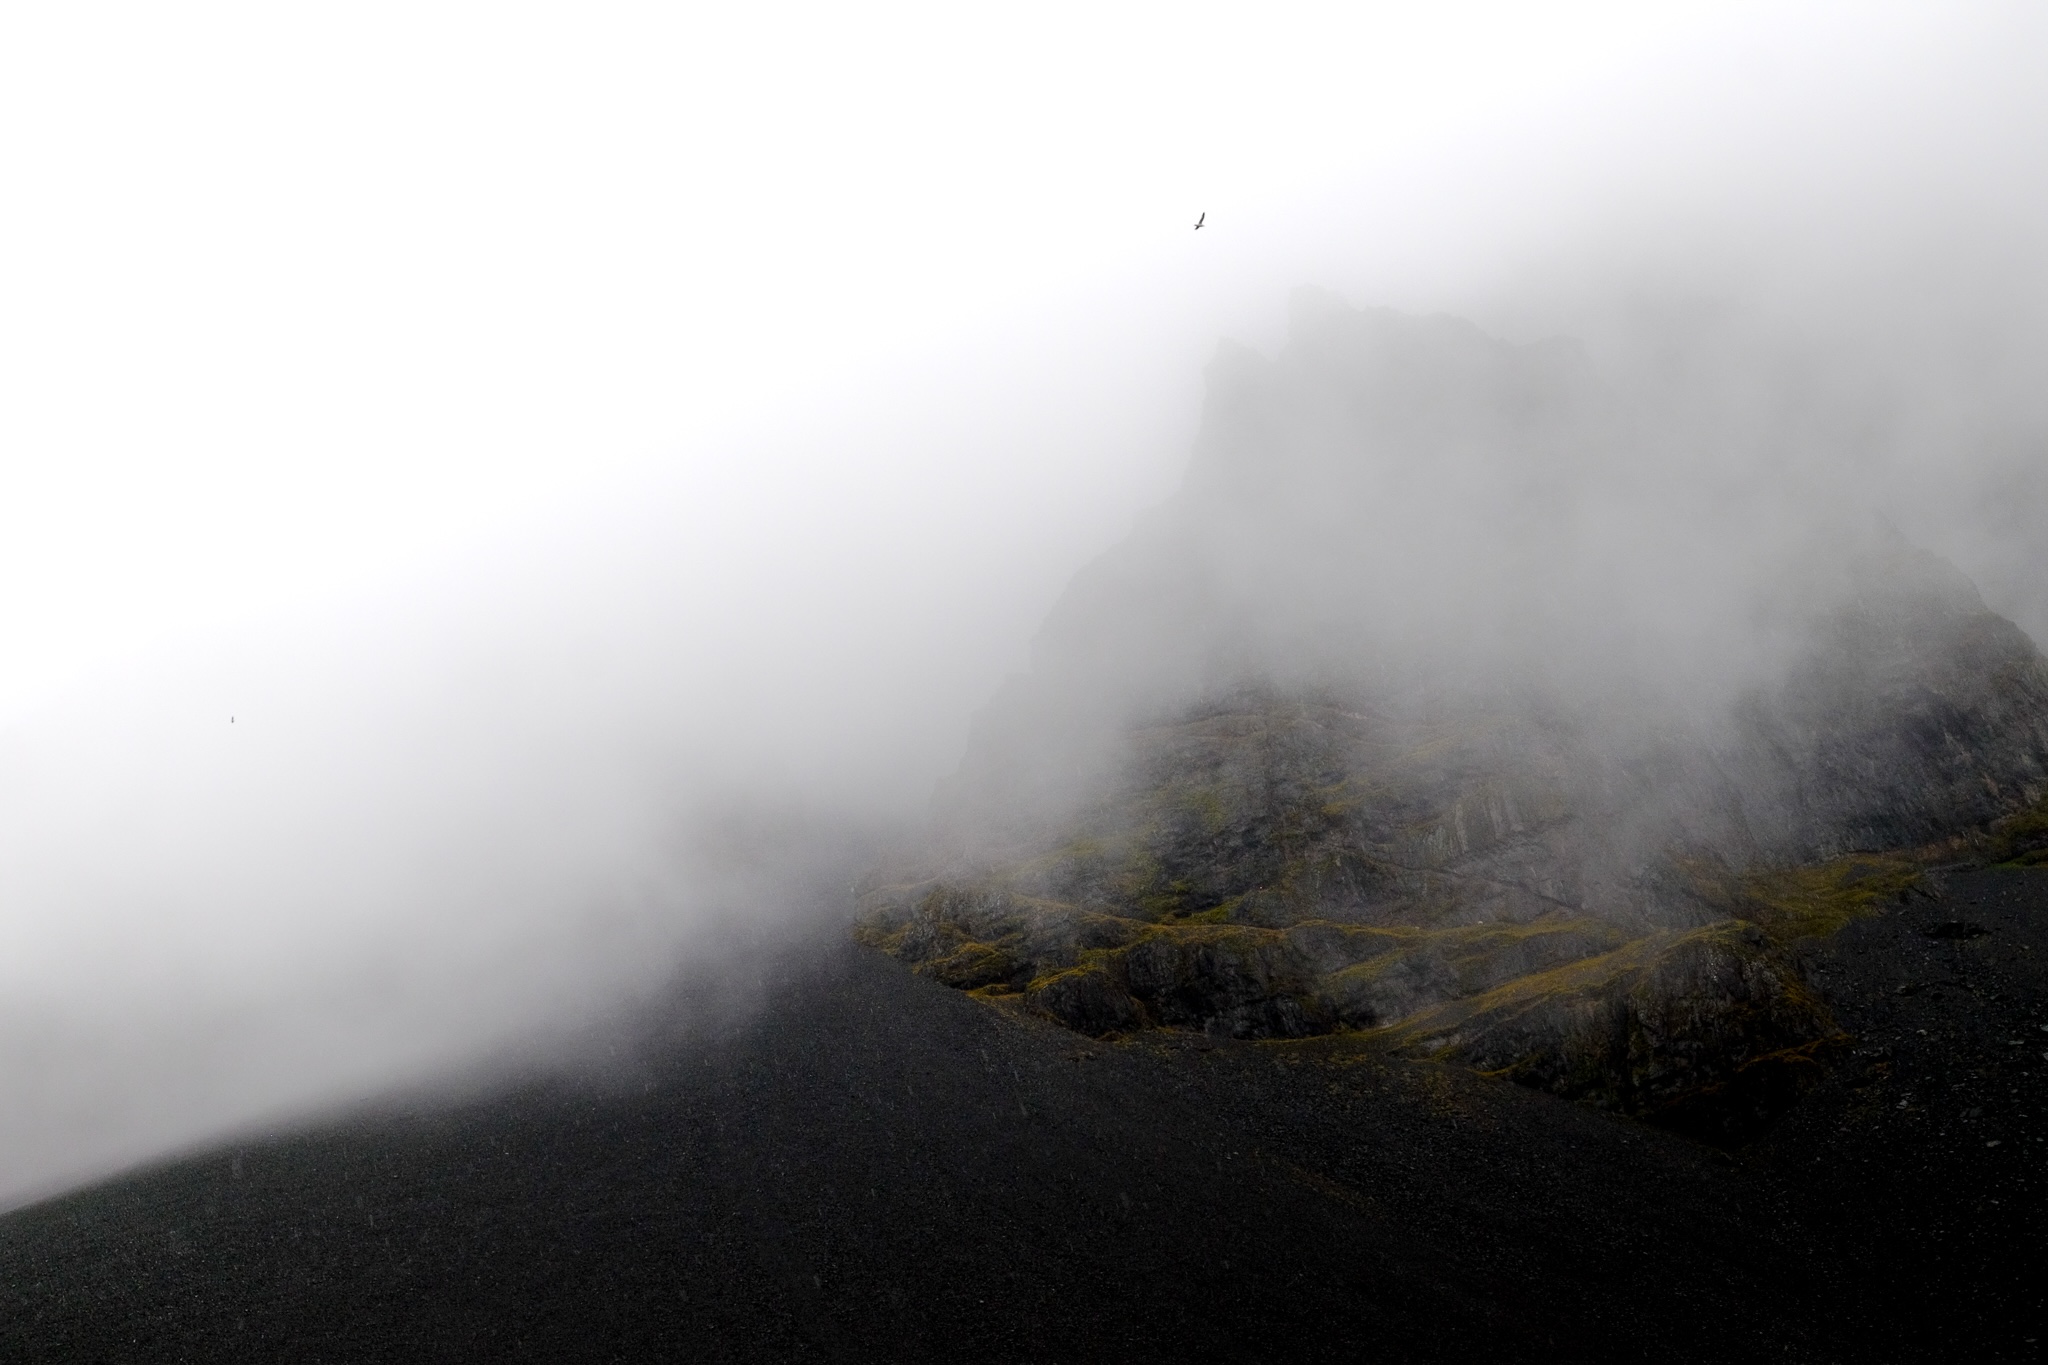 Dark mountain covered in black stones and yellowy-green grass, half covered by thick mist